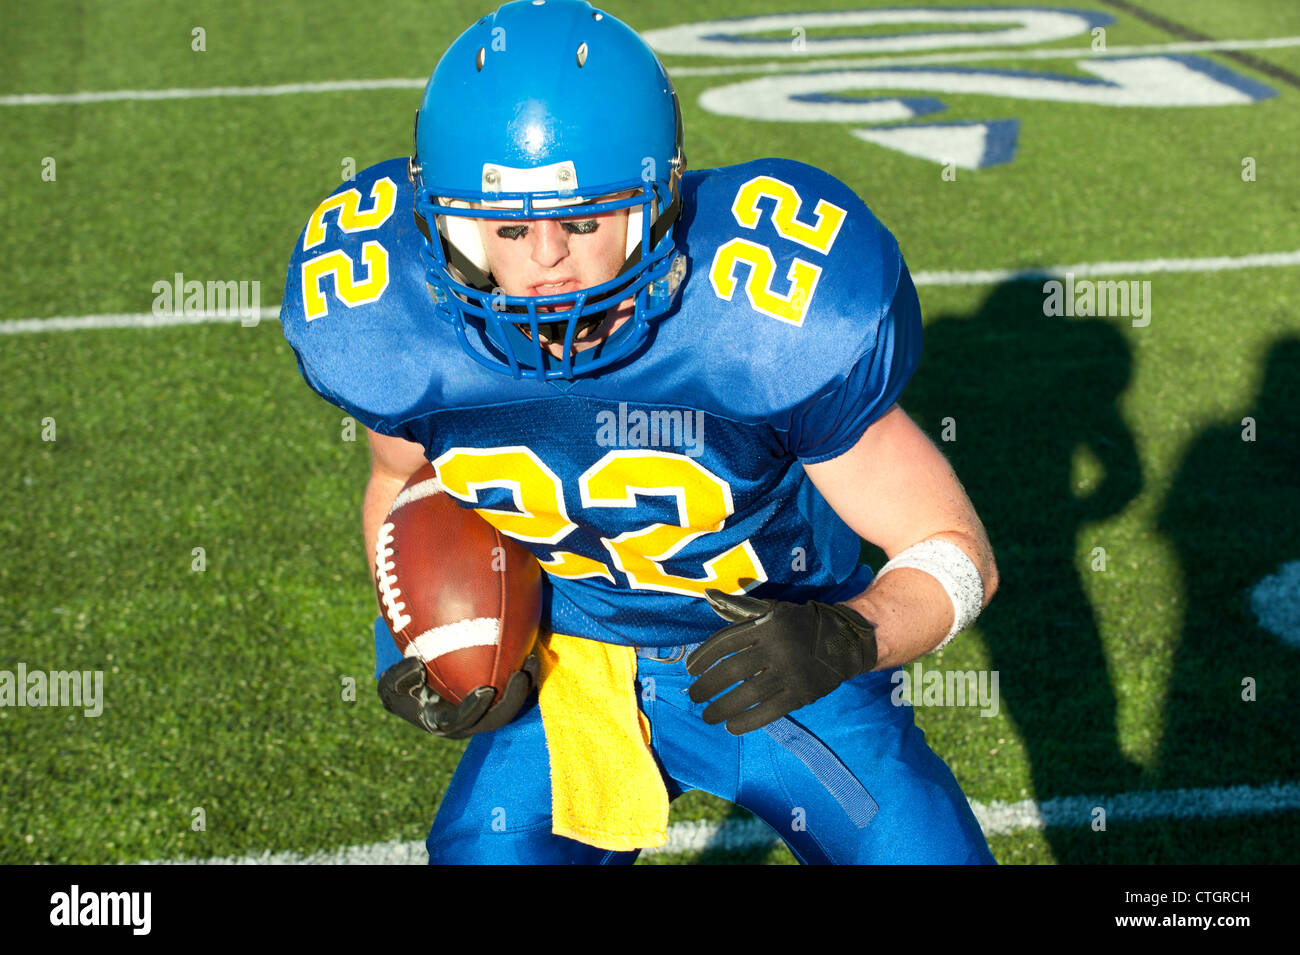 Caucasian football player running with ball Banque D'Images